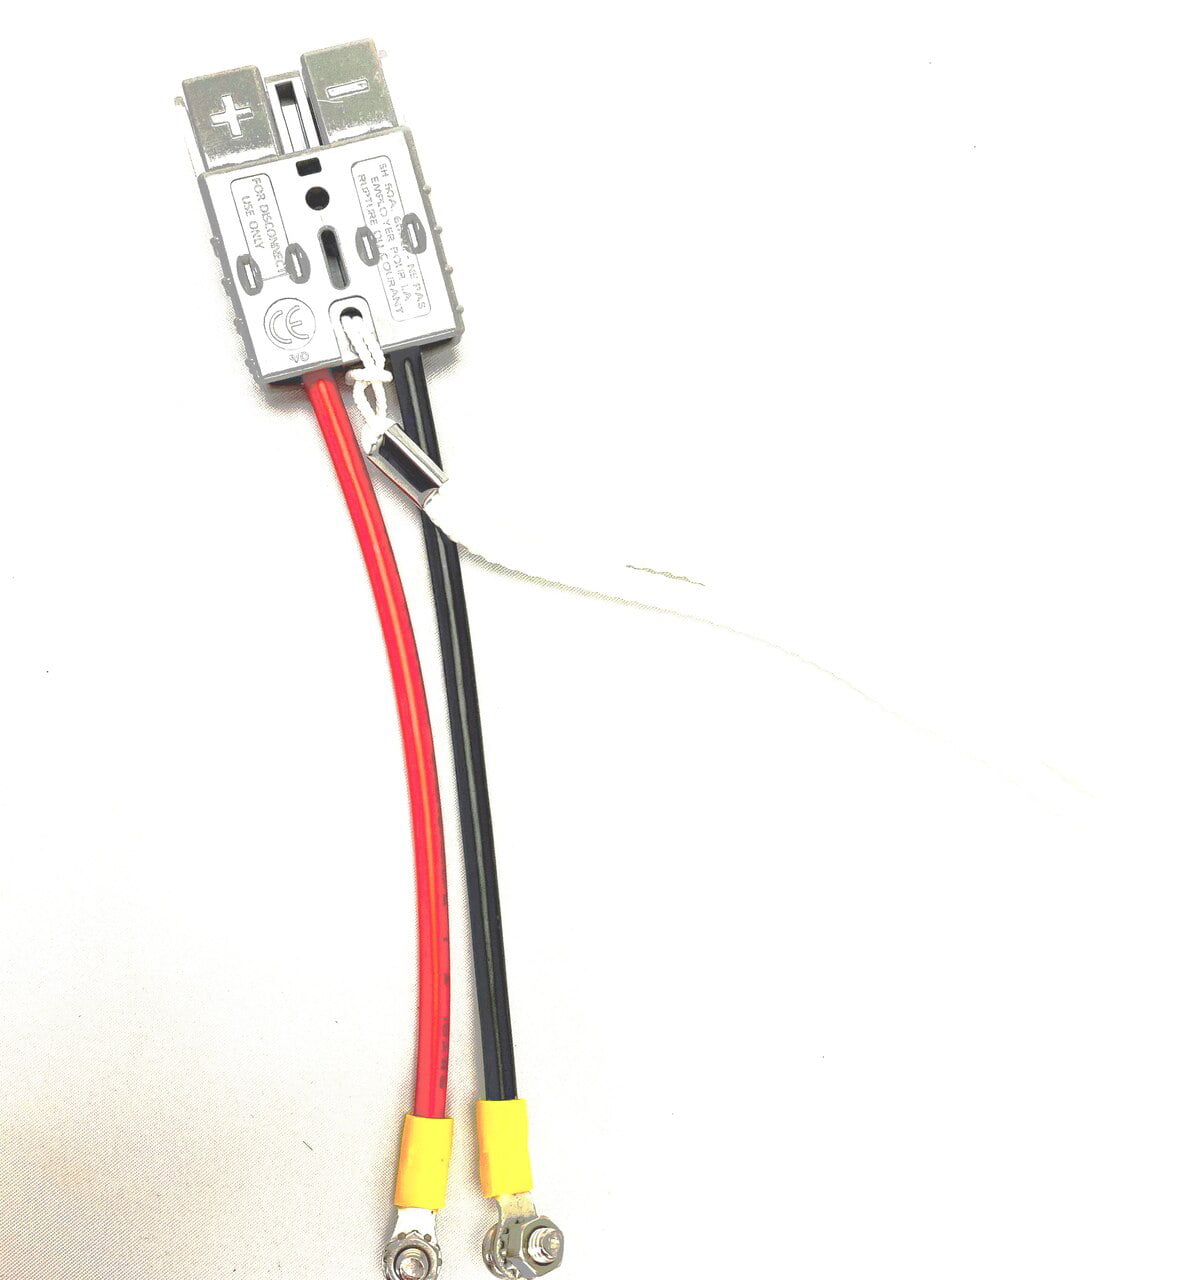 SPS Brand Complete Wire Harness with Terminal Covers and Fuse for APC BP1400 RBC7 Battery Cartridge 16 Pack 